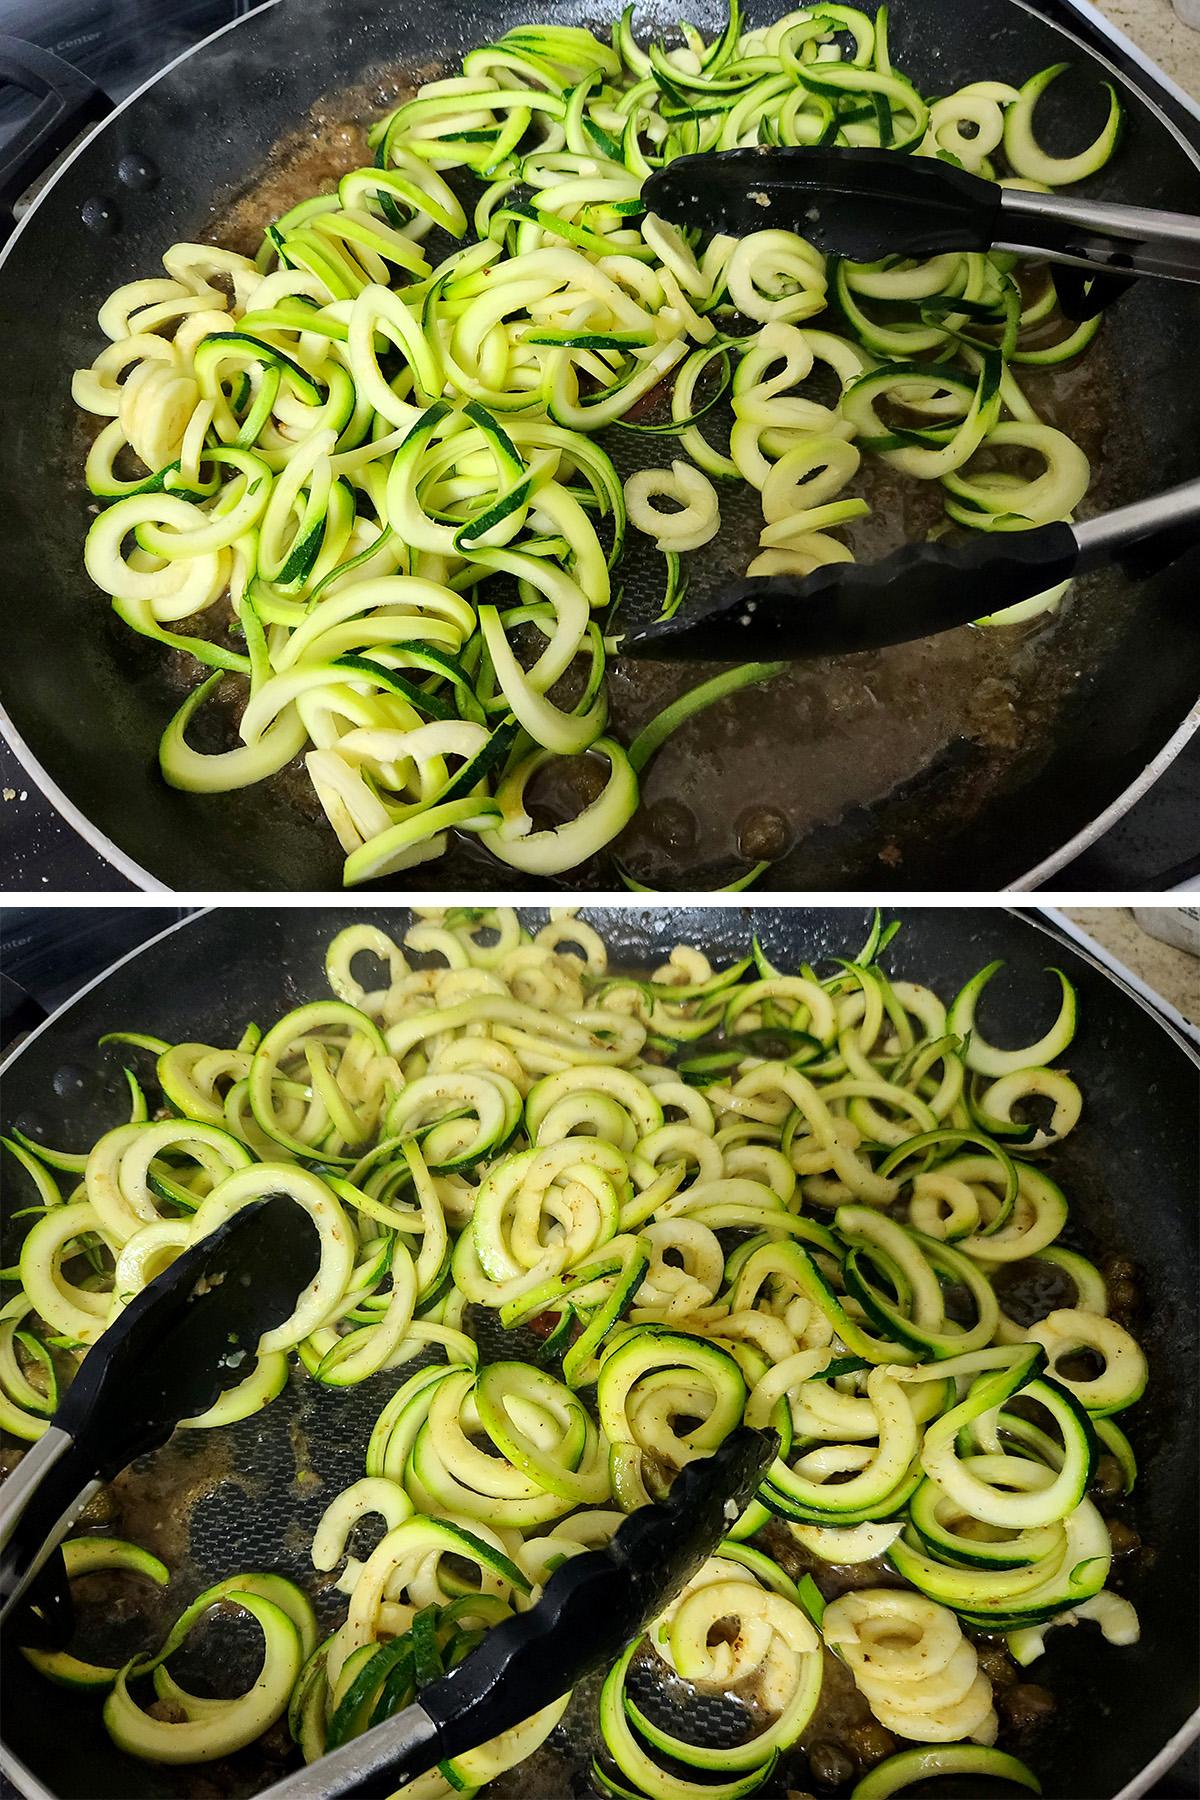 Spiralized zucchini noodles cooking in a pan.